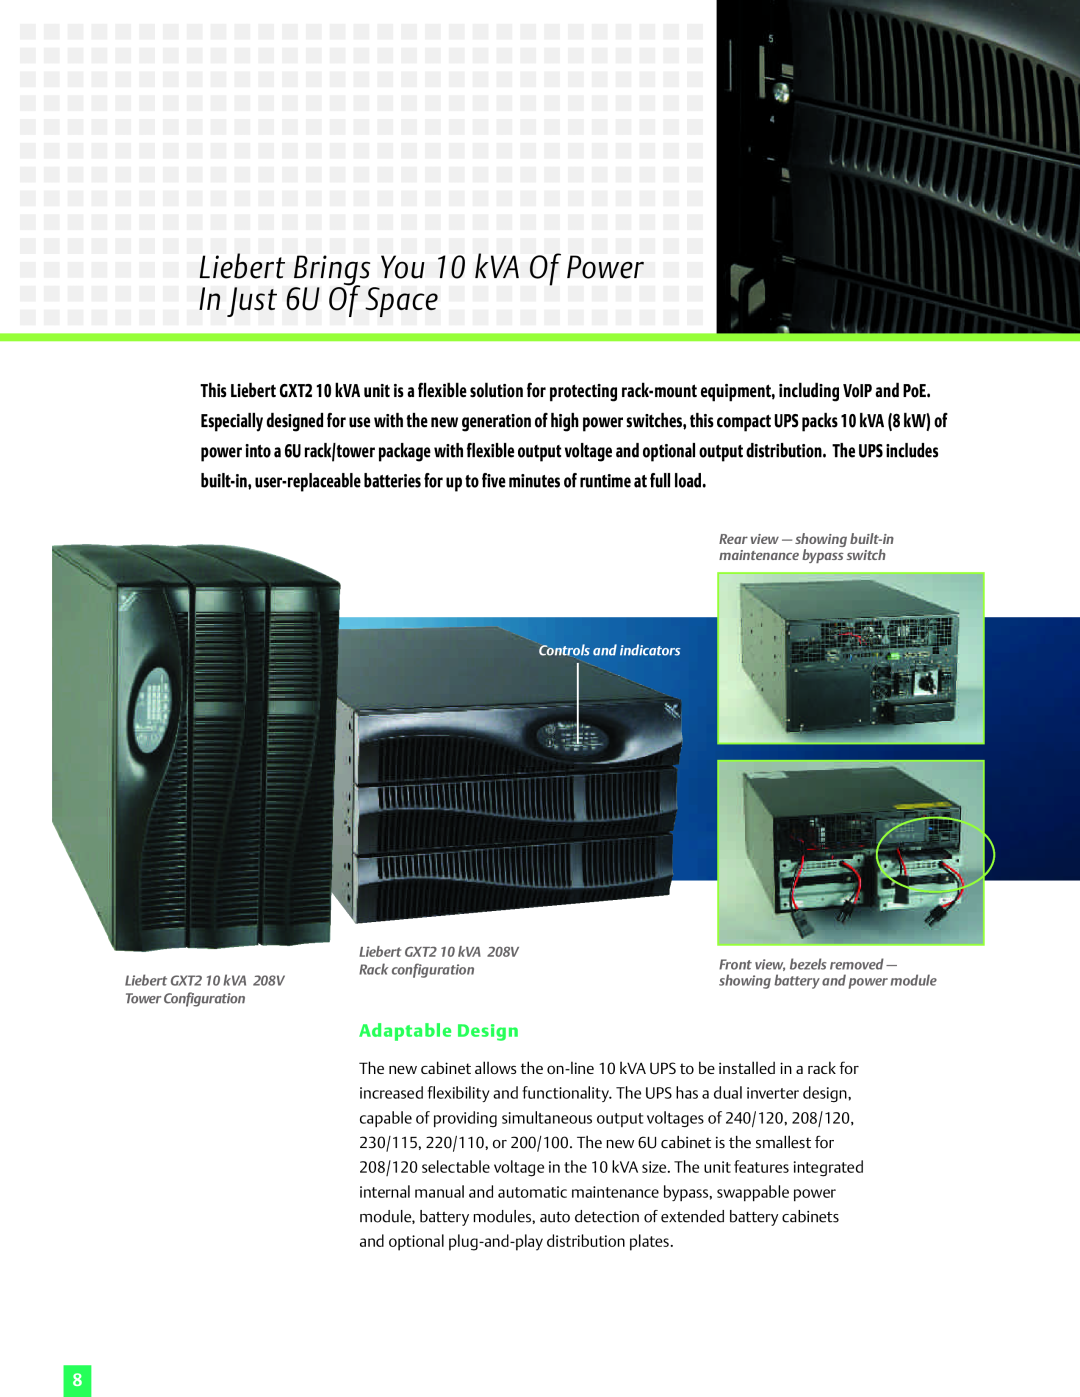 Emerson 6 kVA manual LiebertBrings You 10 kVA Of Power In Just 6U OfSpace, Adaptable Design, Controls and indicators 